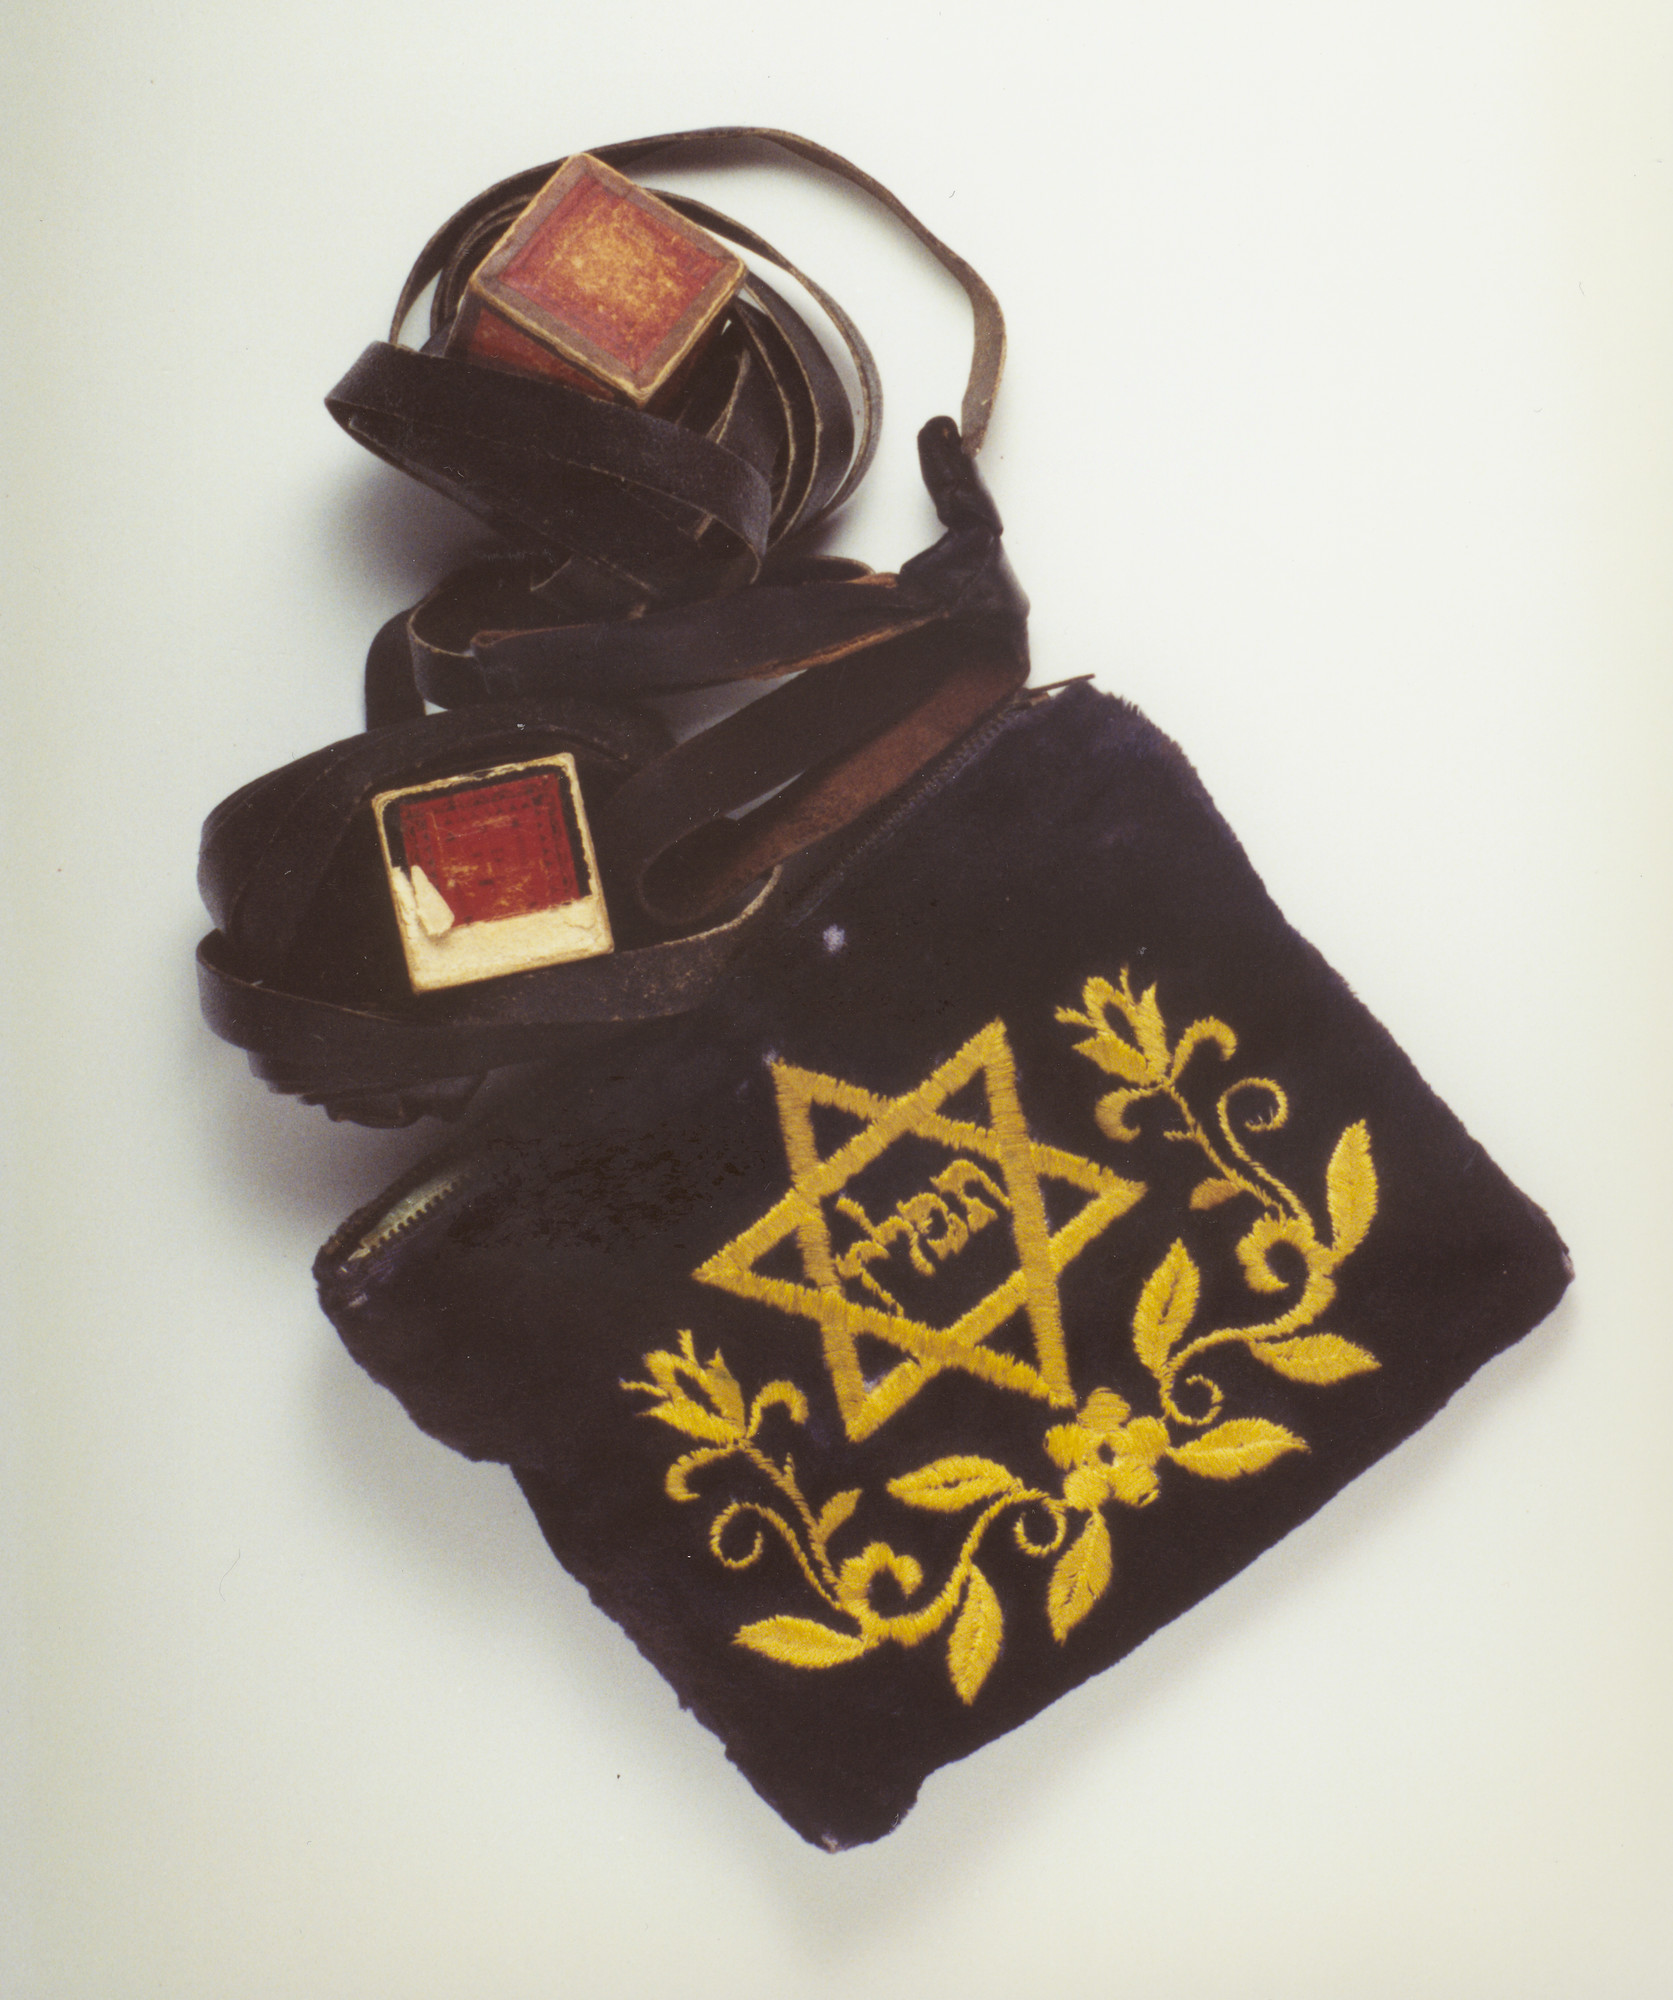 1st century Tefillin (Jewish ritual gear) from caves in the Judean desert  compared to modern ones [1134x835] : r/ArtefactPorn